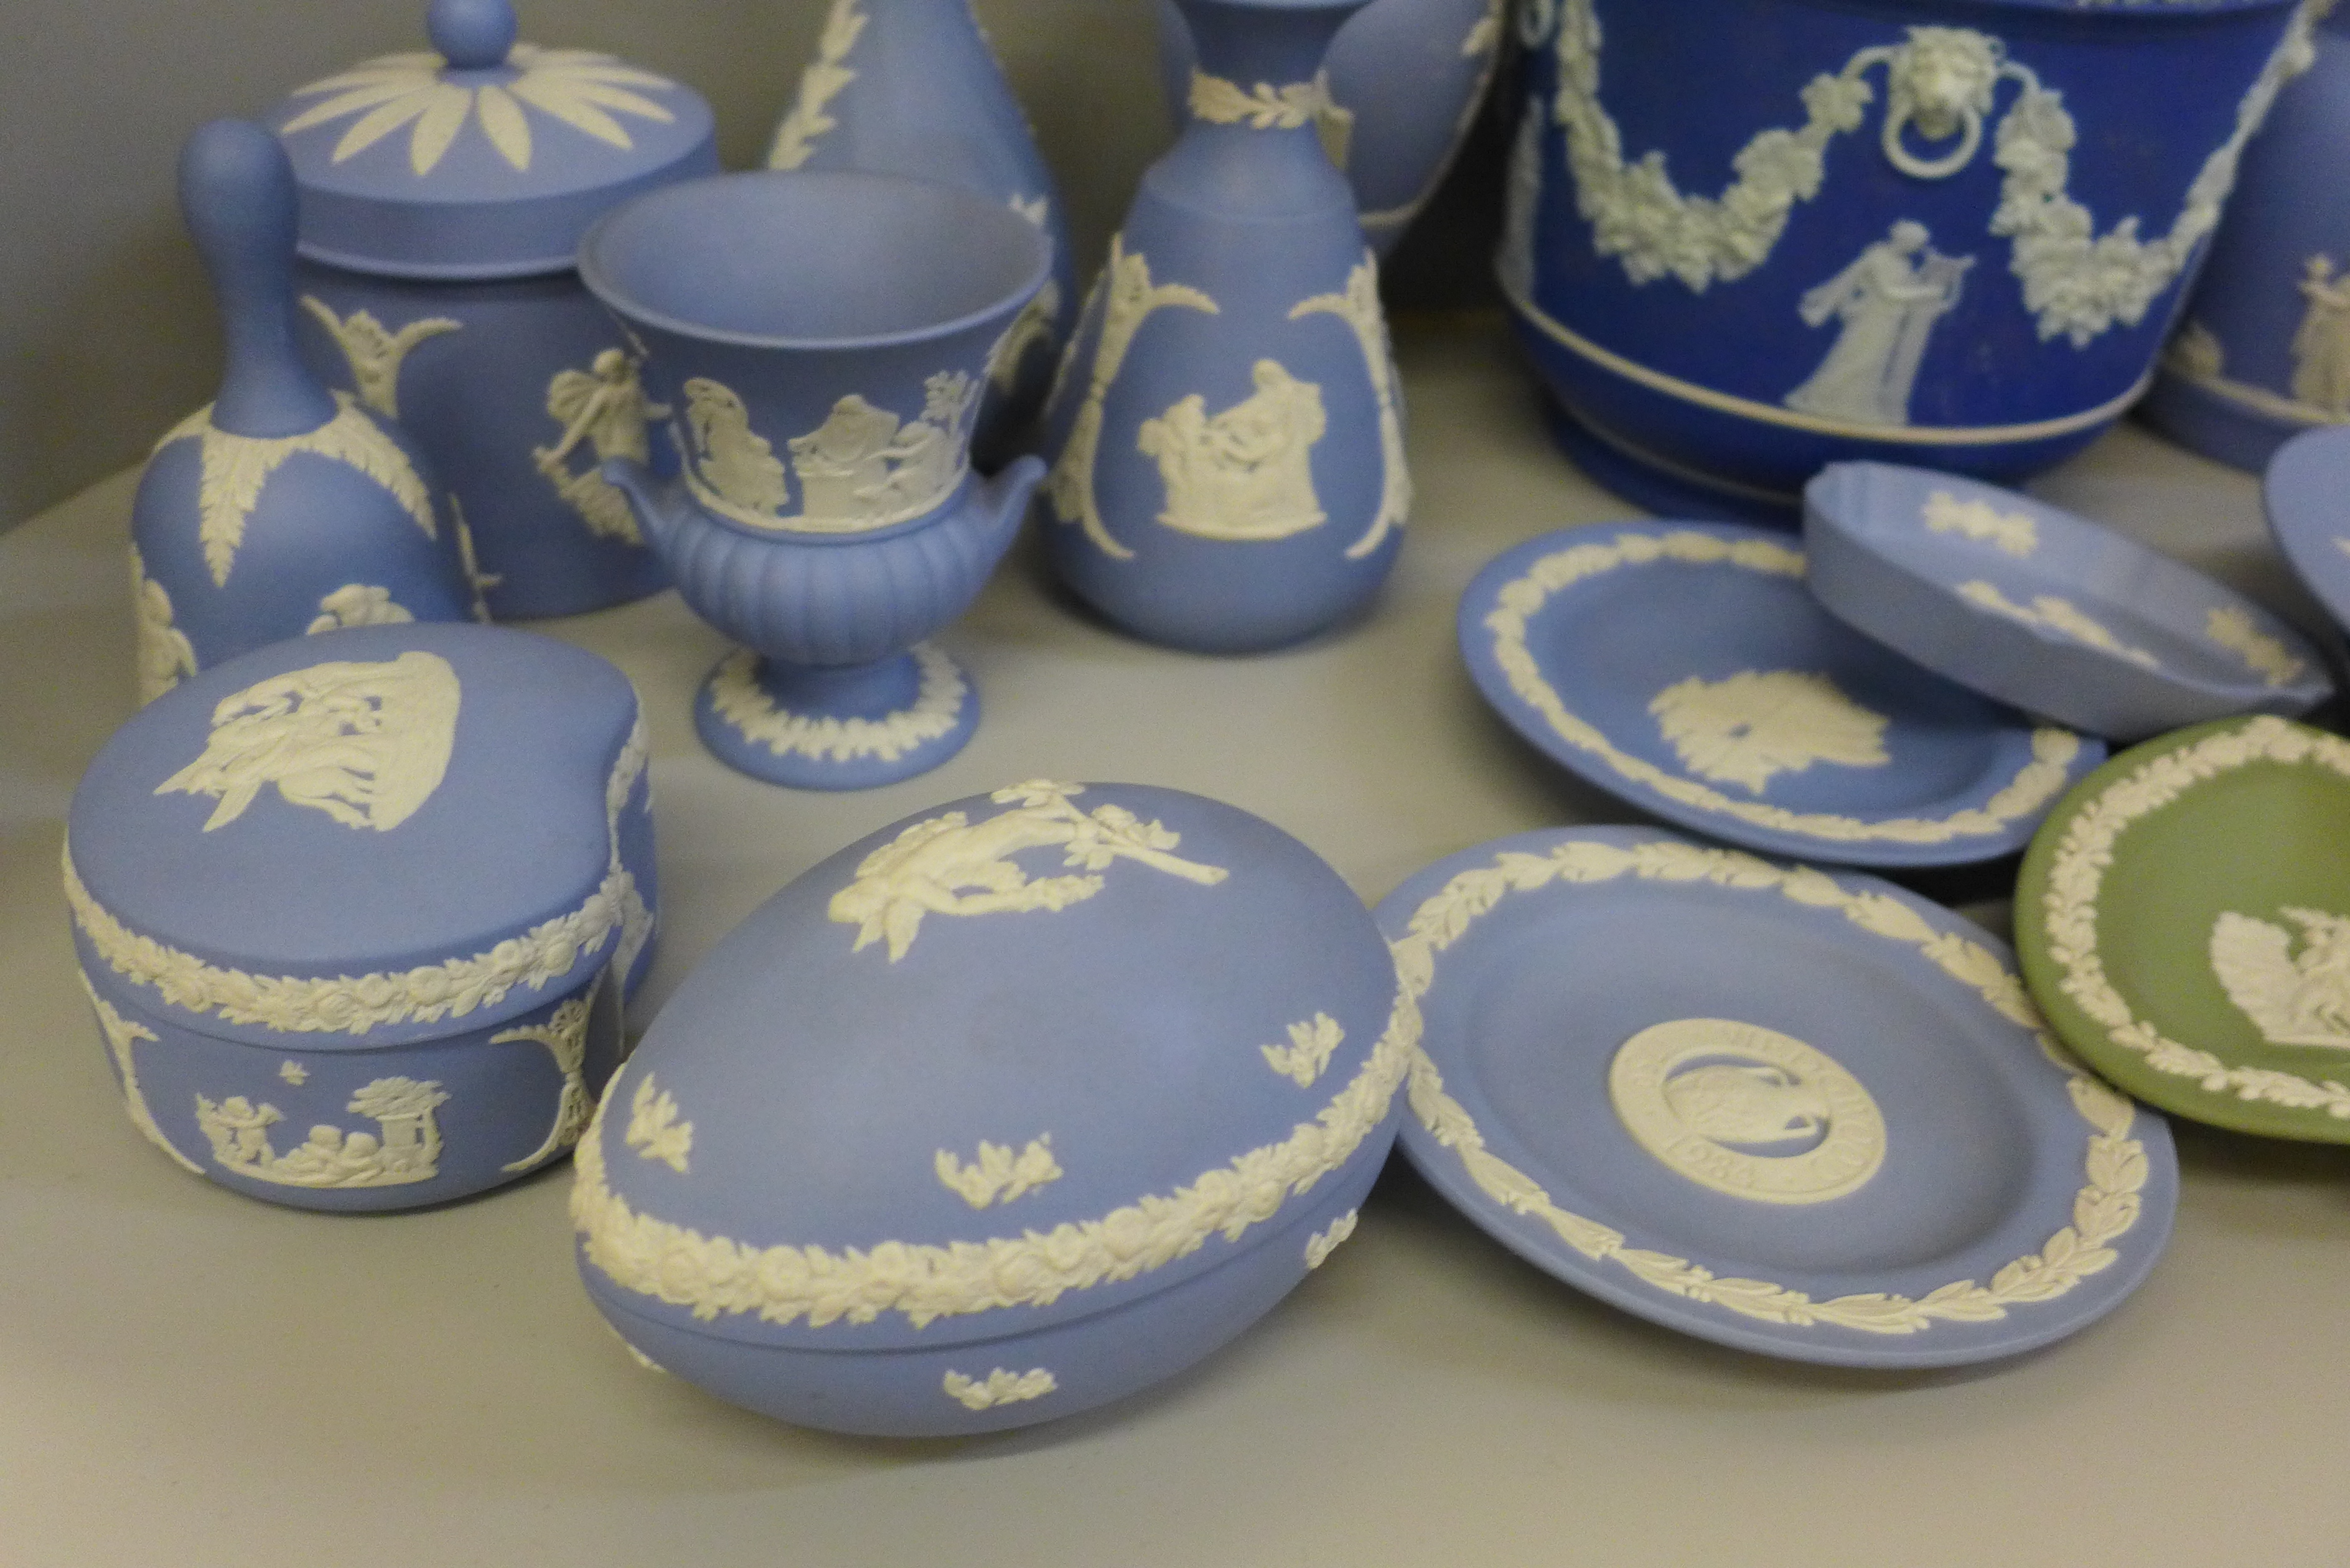 A box of approximately 20 items of Wedgwood Jasperware including a jardiniere, jug, vases, lidded - Image 5 of 5